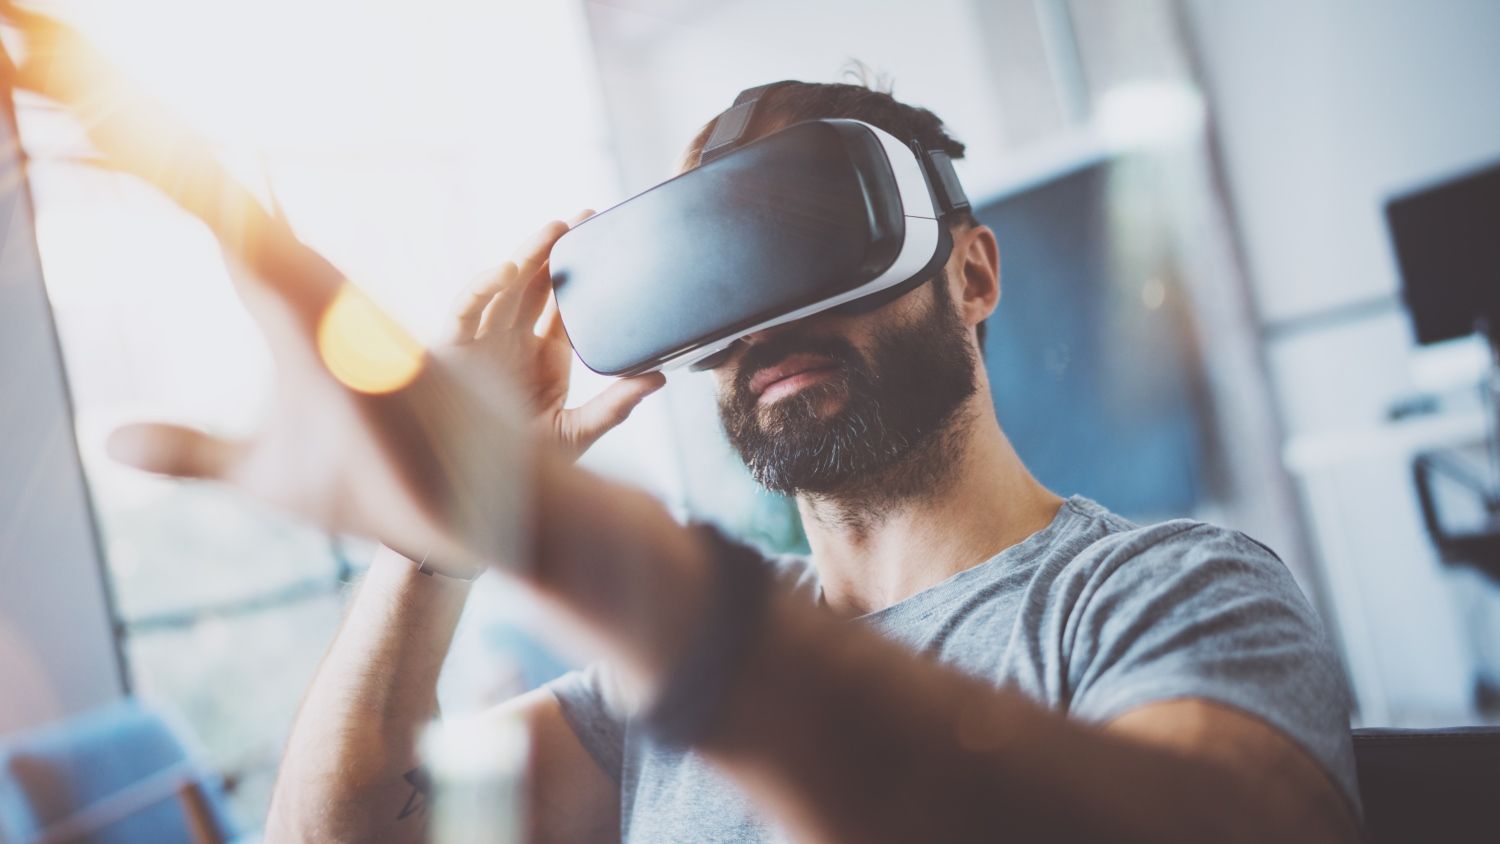 How will VR technology impact your business operations?